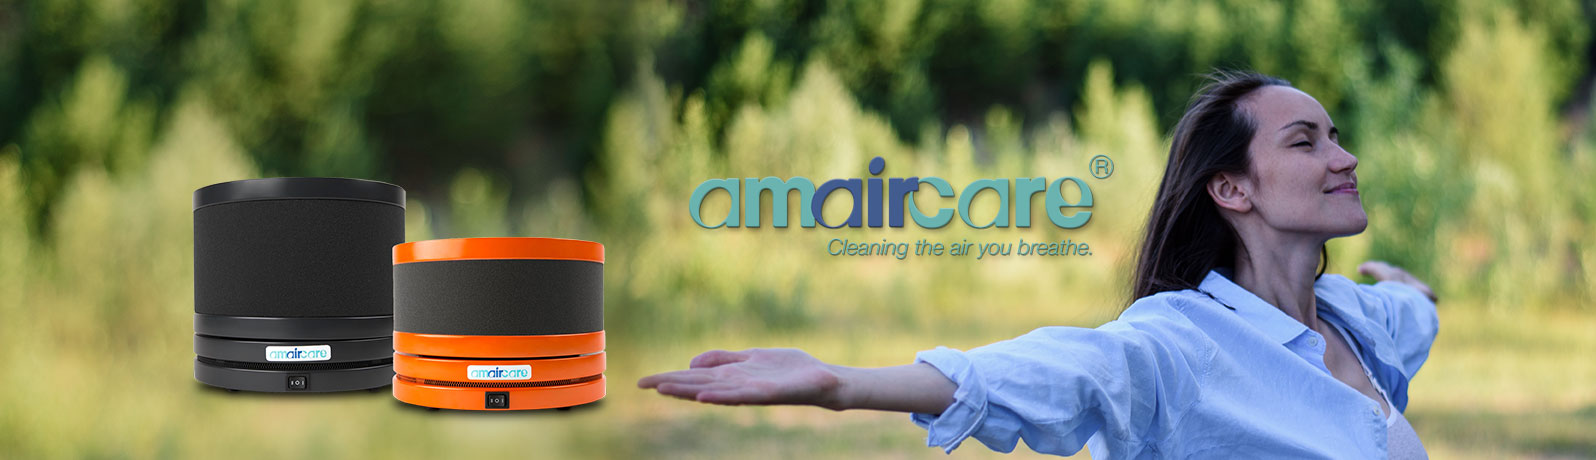  Amaircare | Cleaning the Air You Breathe